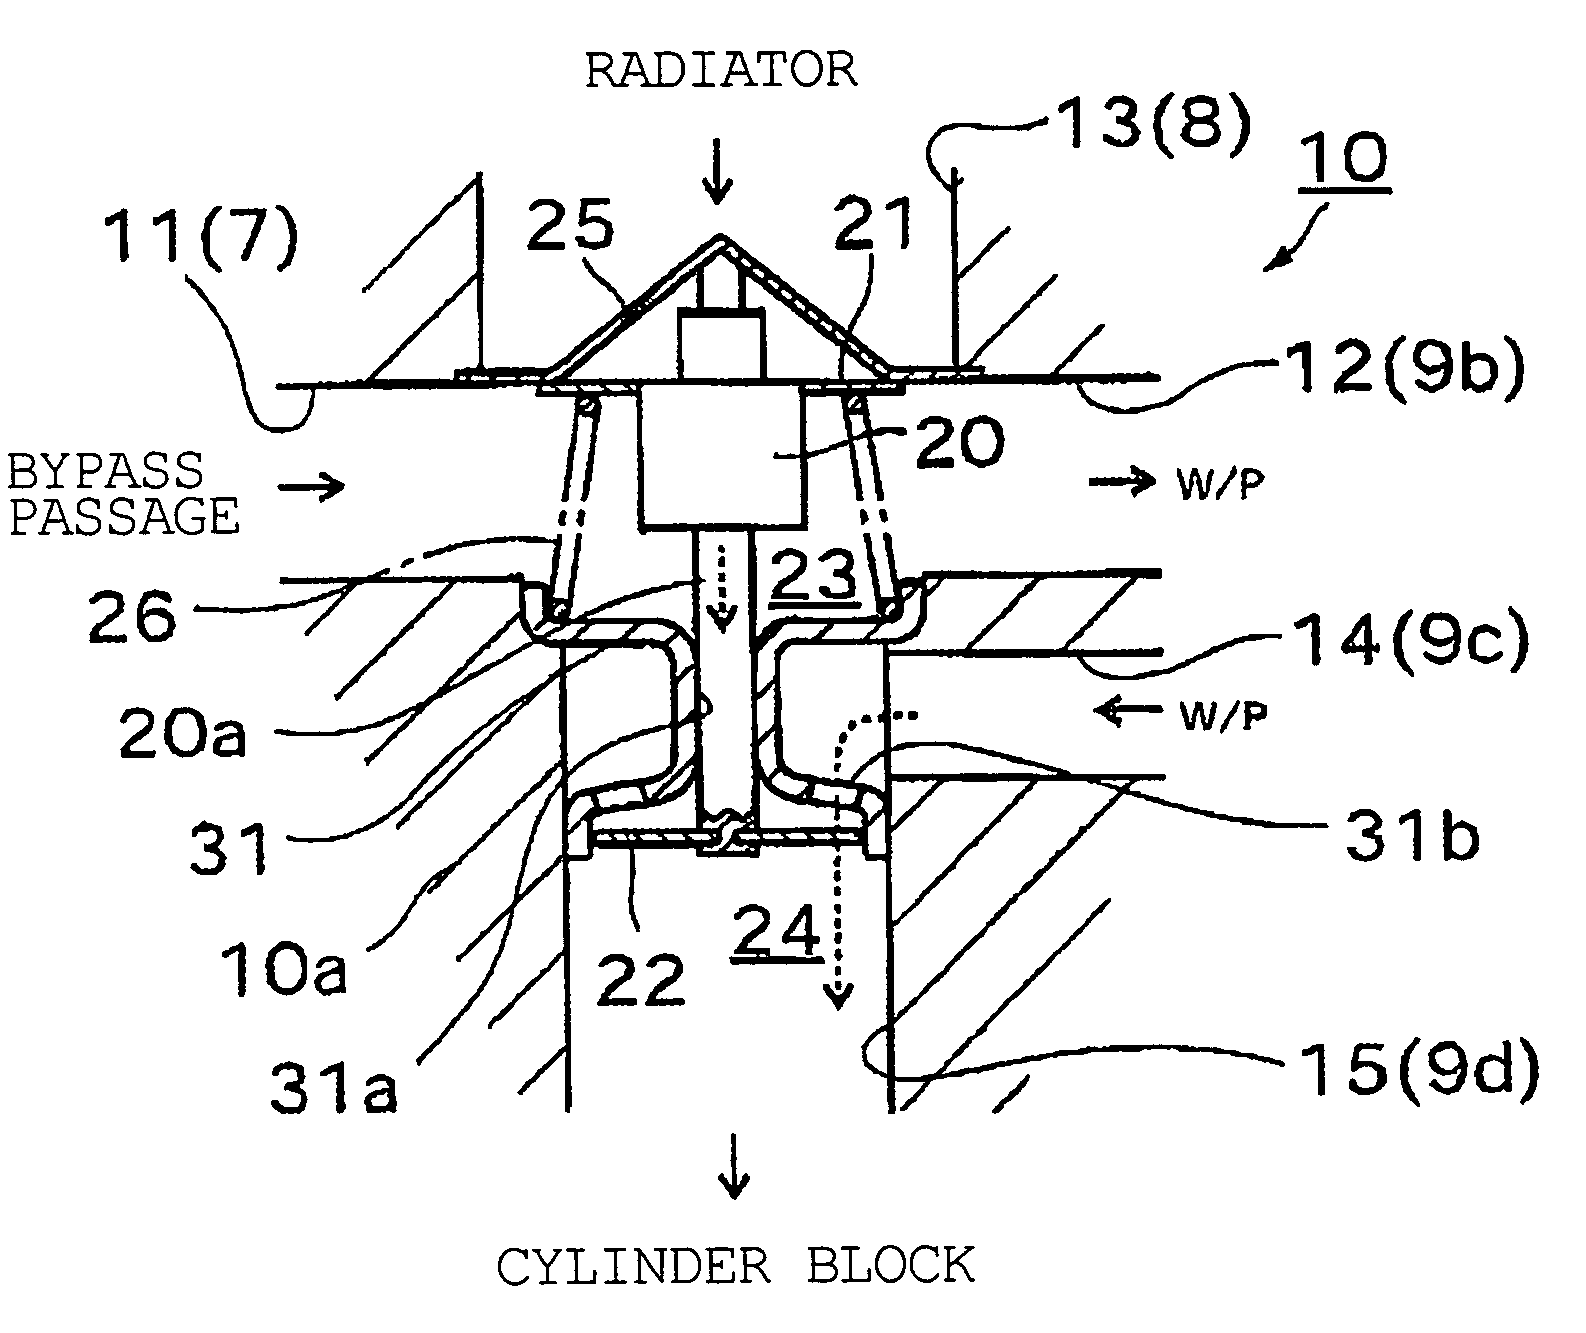 Thermostat for two-system cooling device